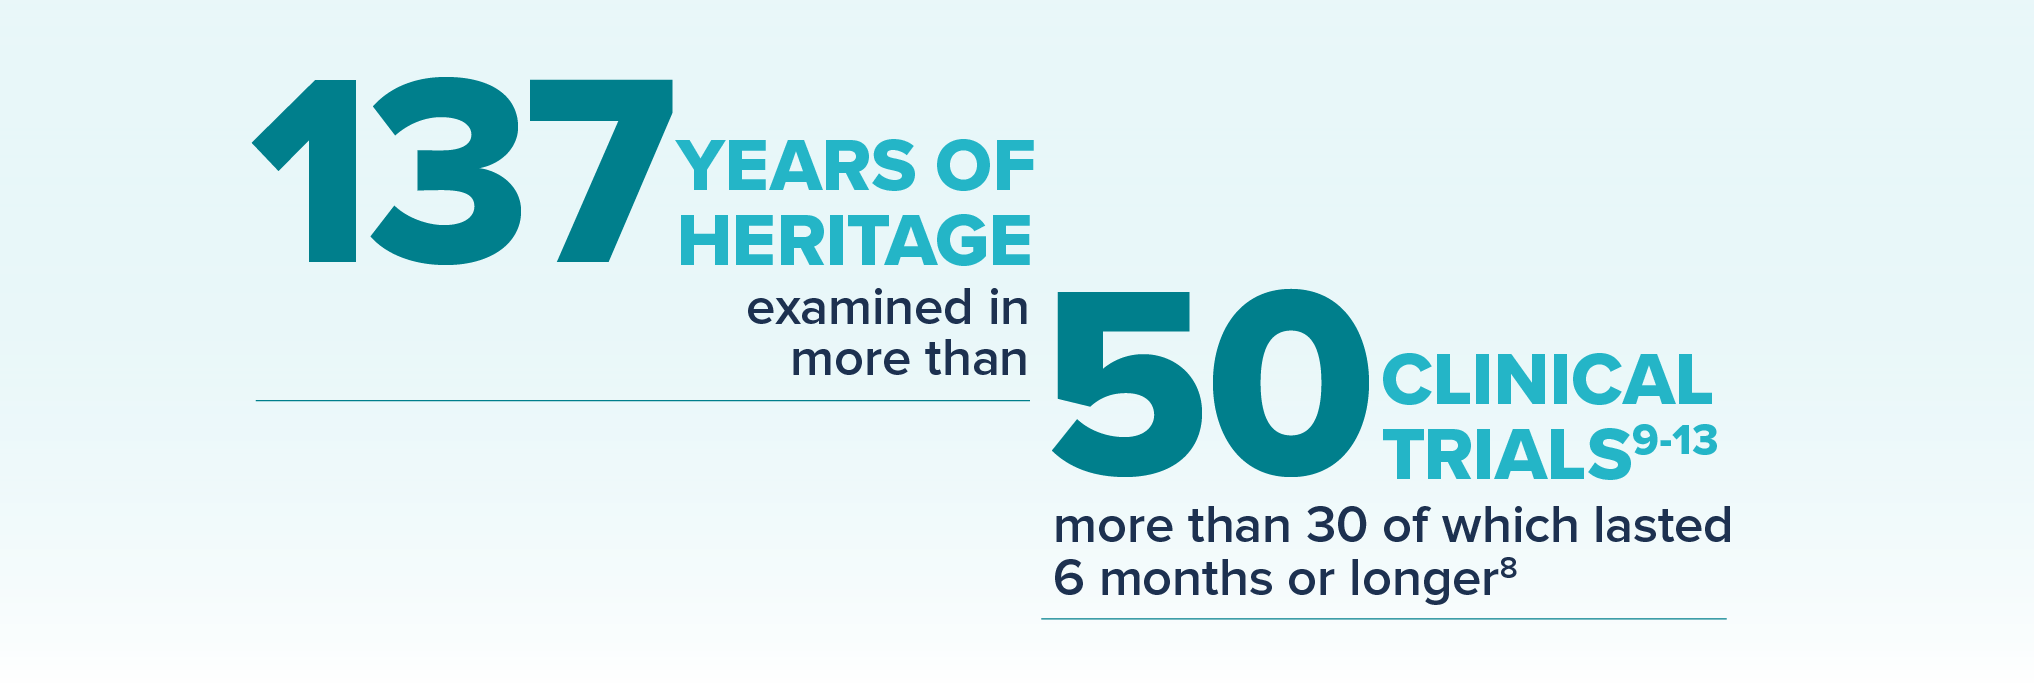 With over 137 years of heritage examined in more than 50 clinical trials, Listerine Antiseptic is the most extensively tested OTC mouthwash